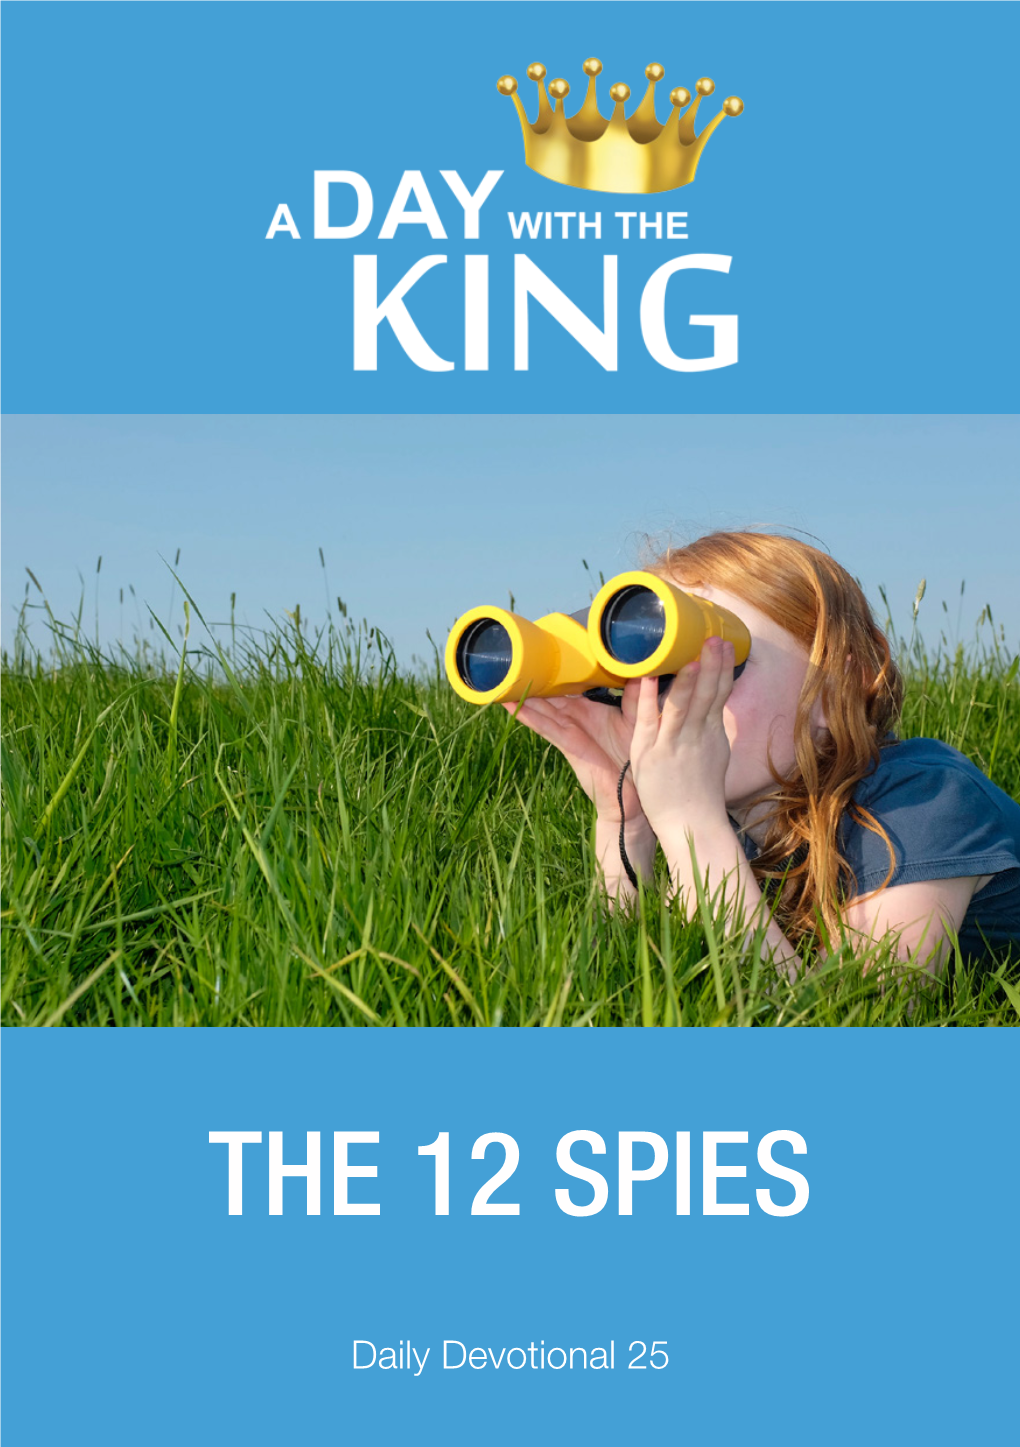 The 12 Spies